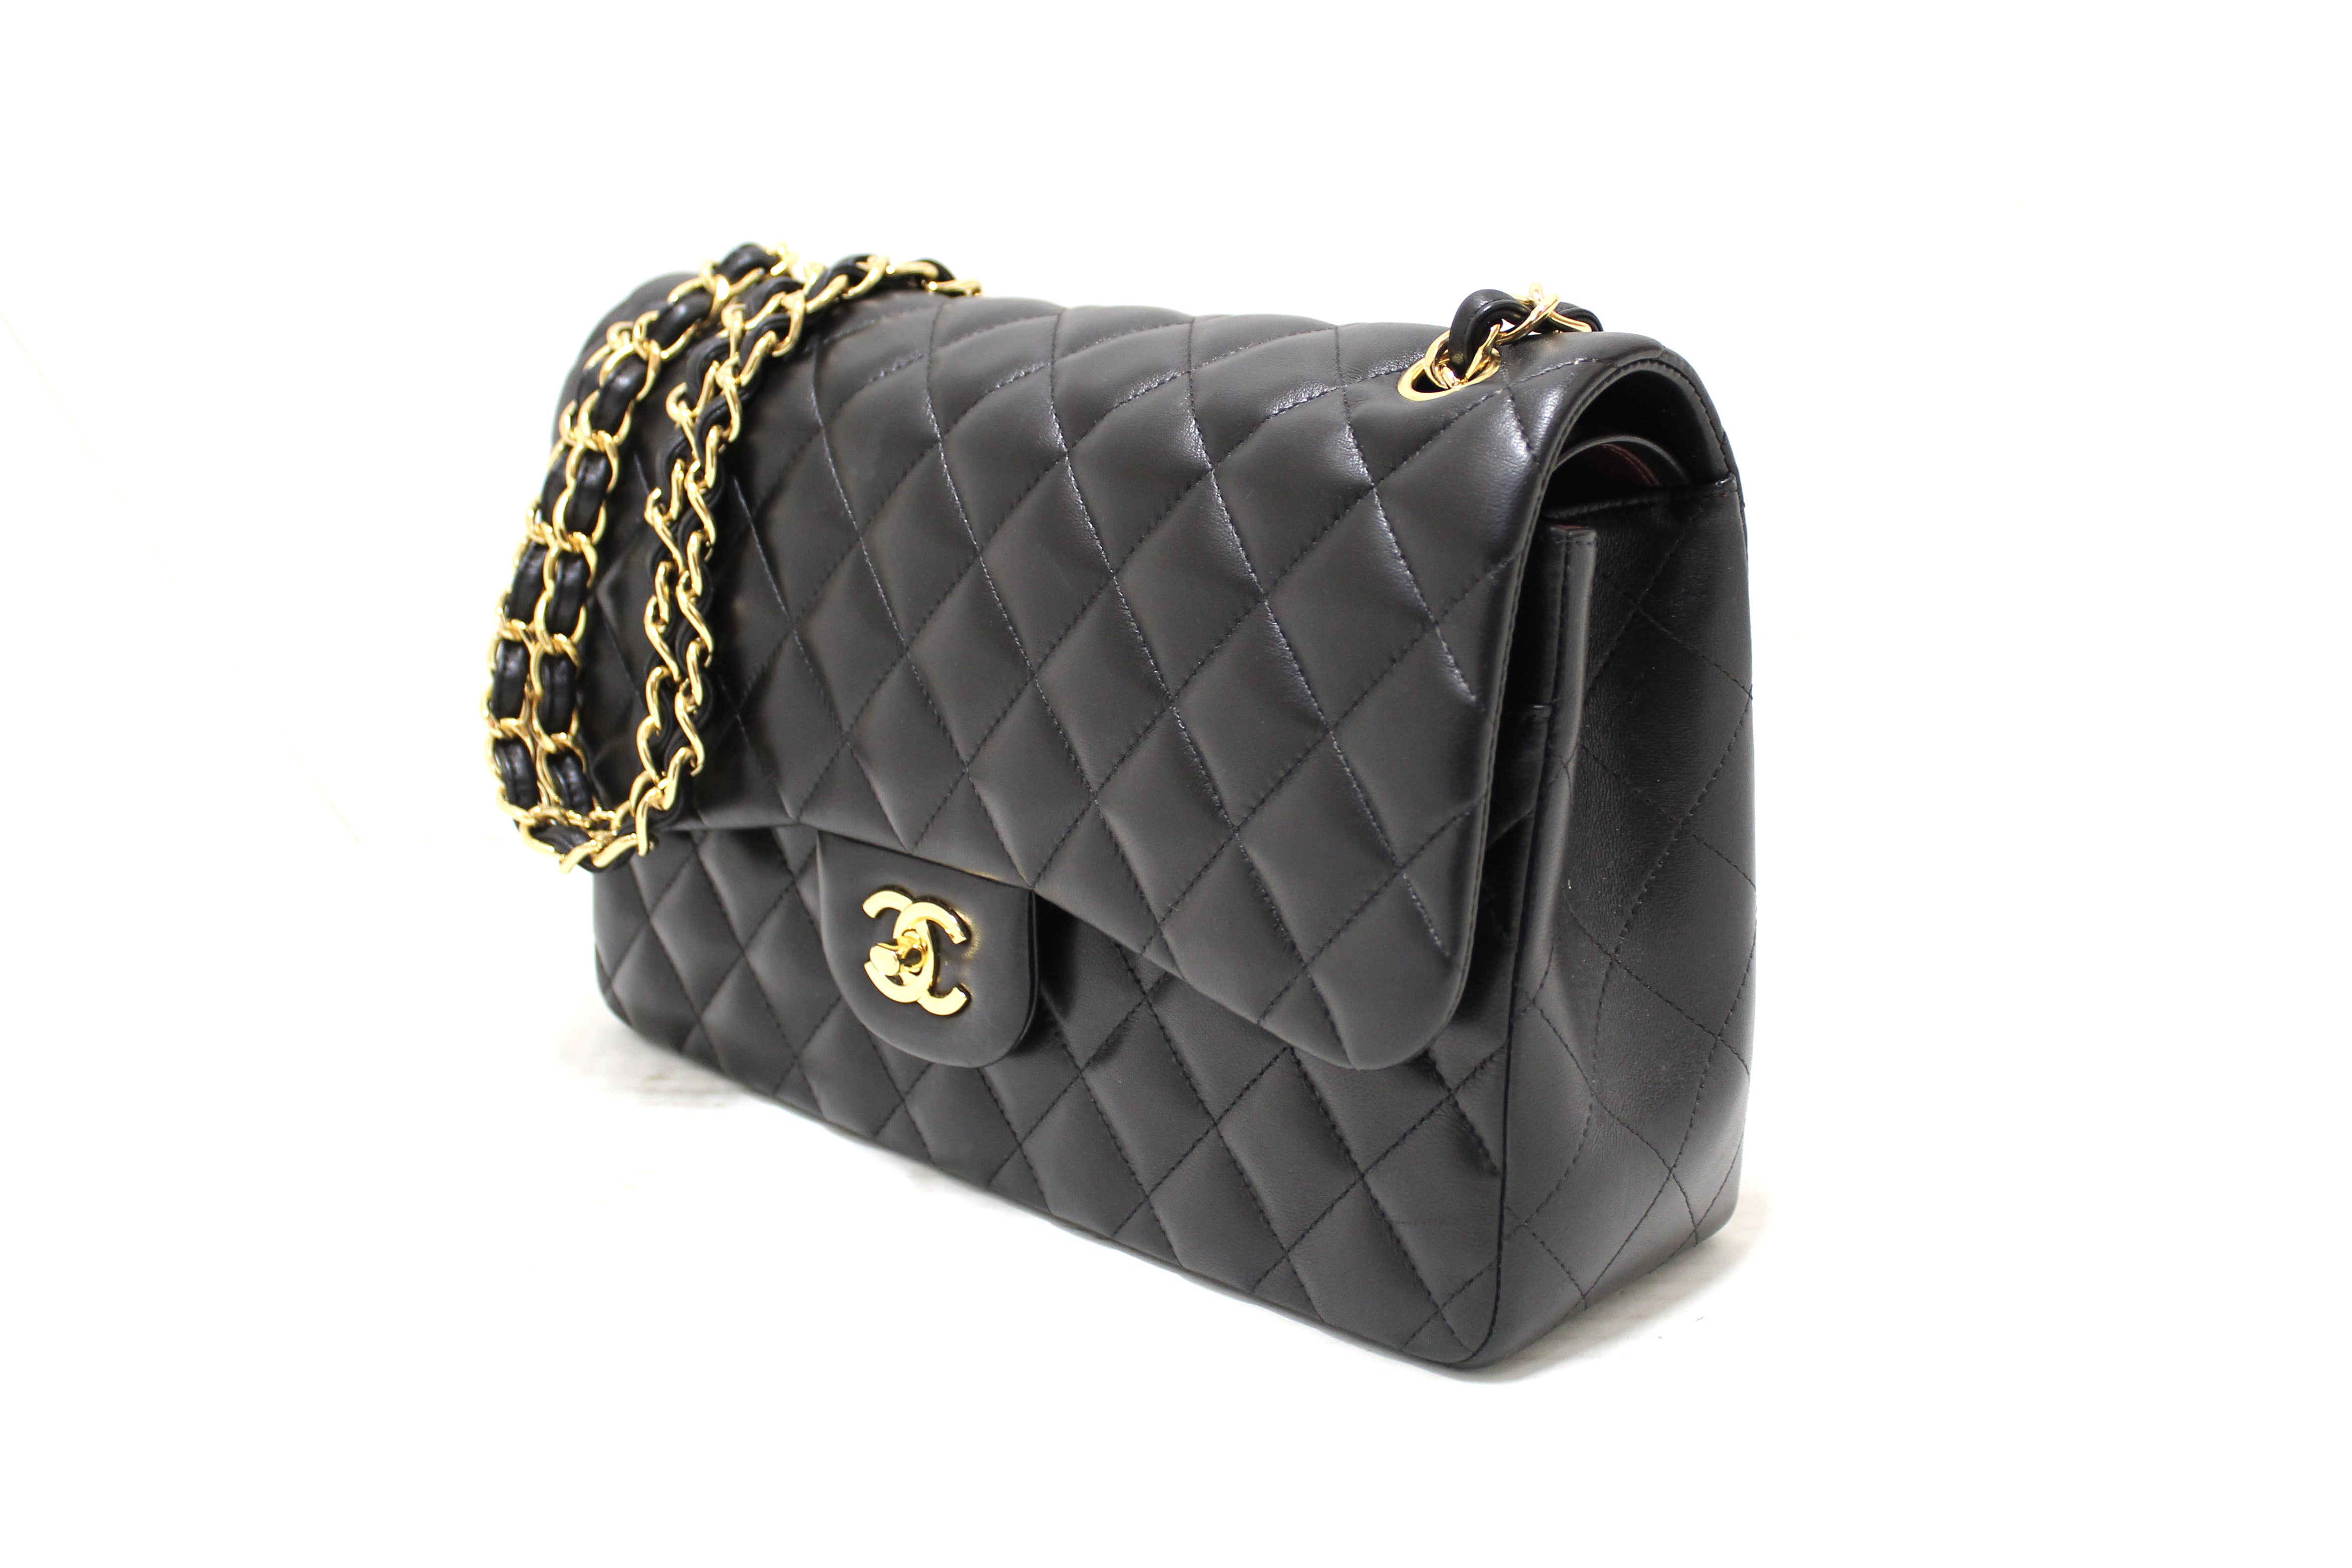 Authentic Chanel Black Quilted Lamskin Leather Classic Jumbo Double Flap Bag